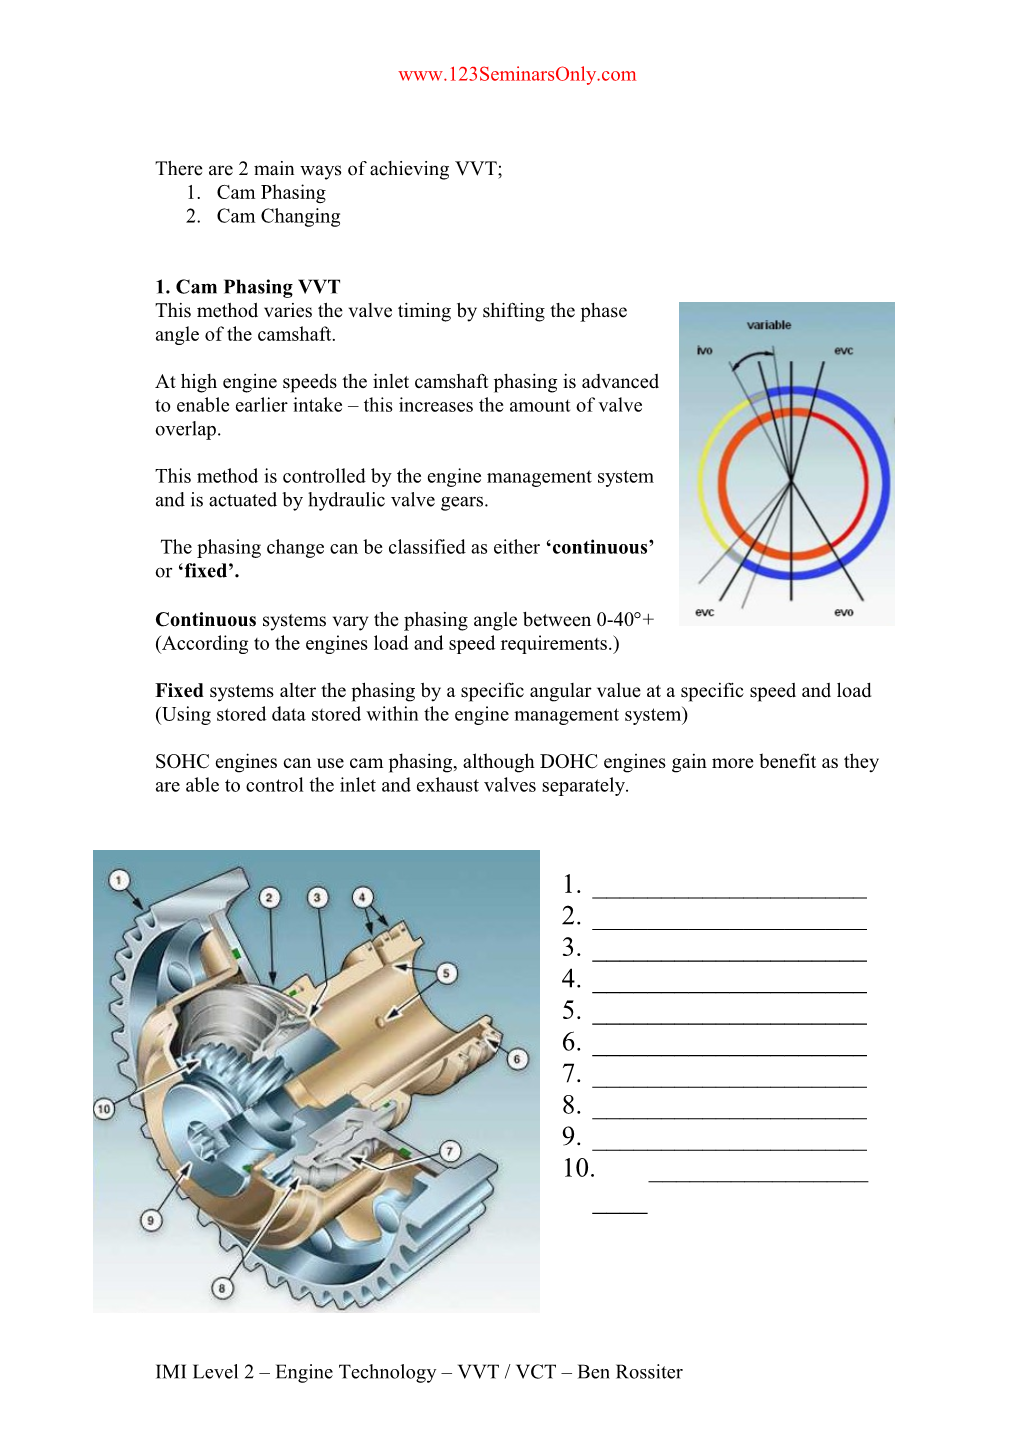 Variable Valve Timing (Variable Cam Timing Or Variable Valve Lift)